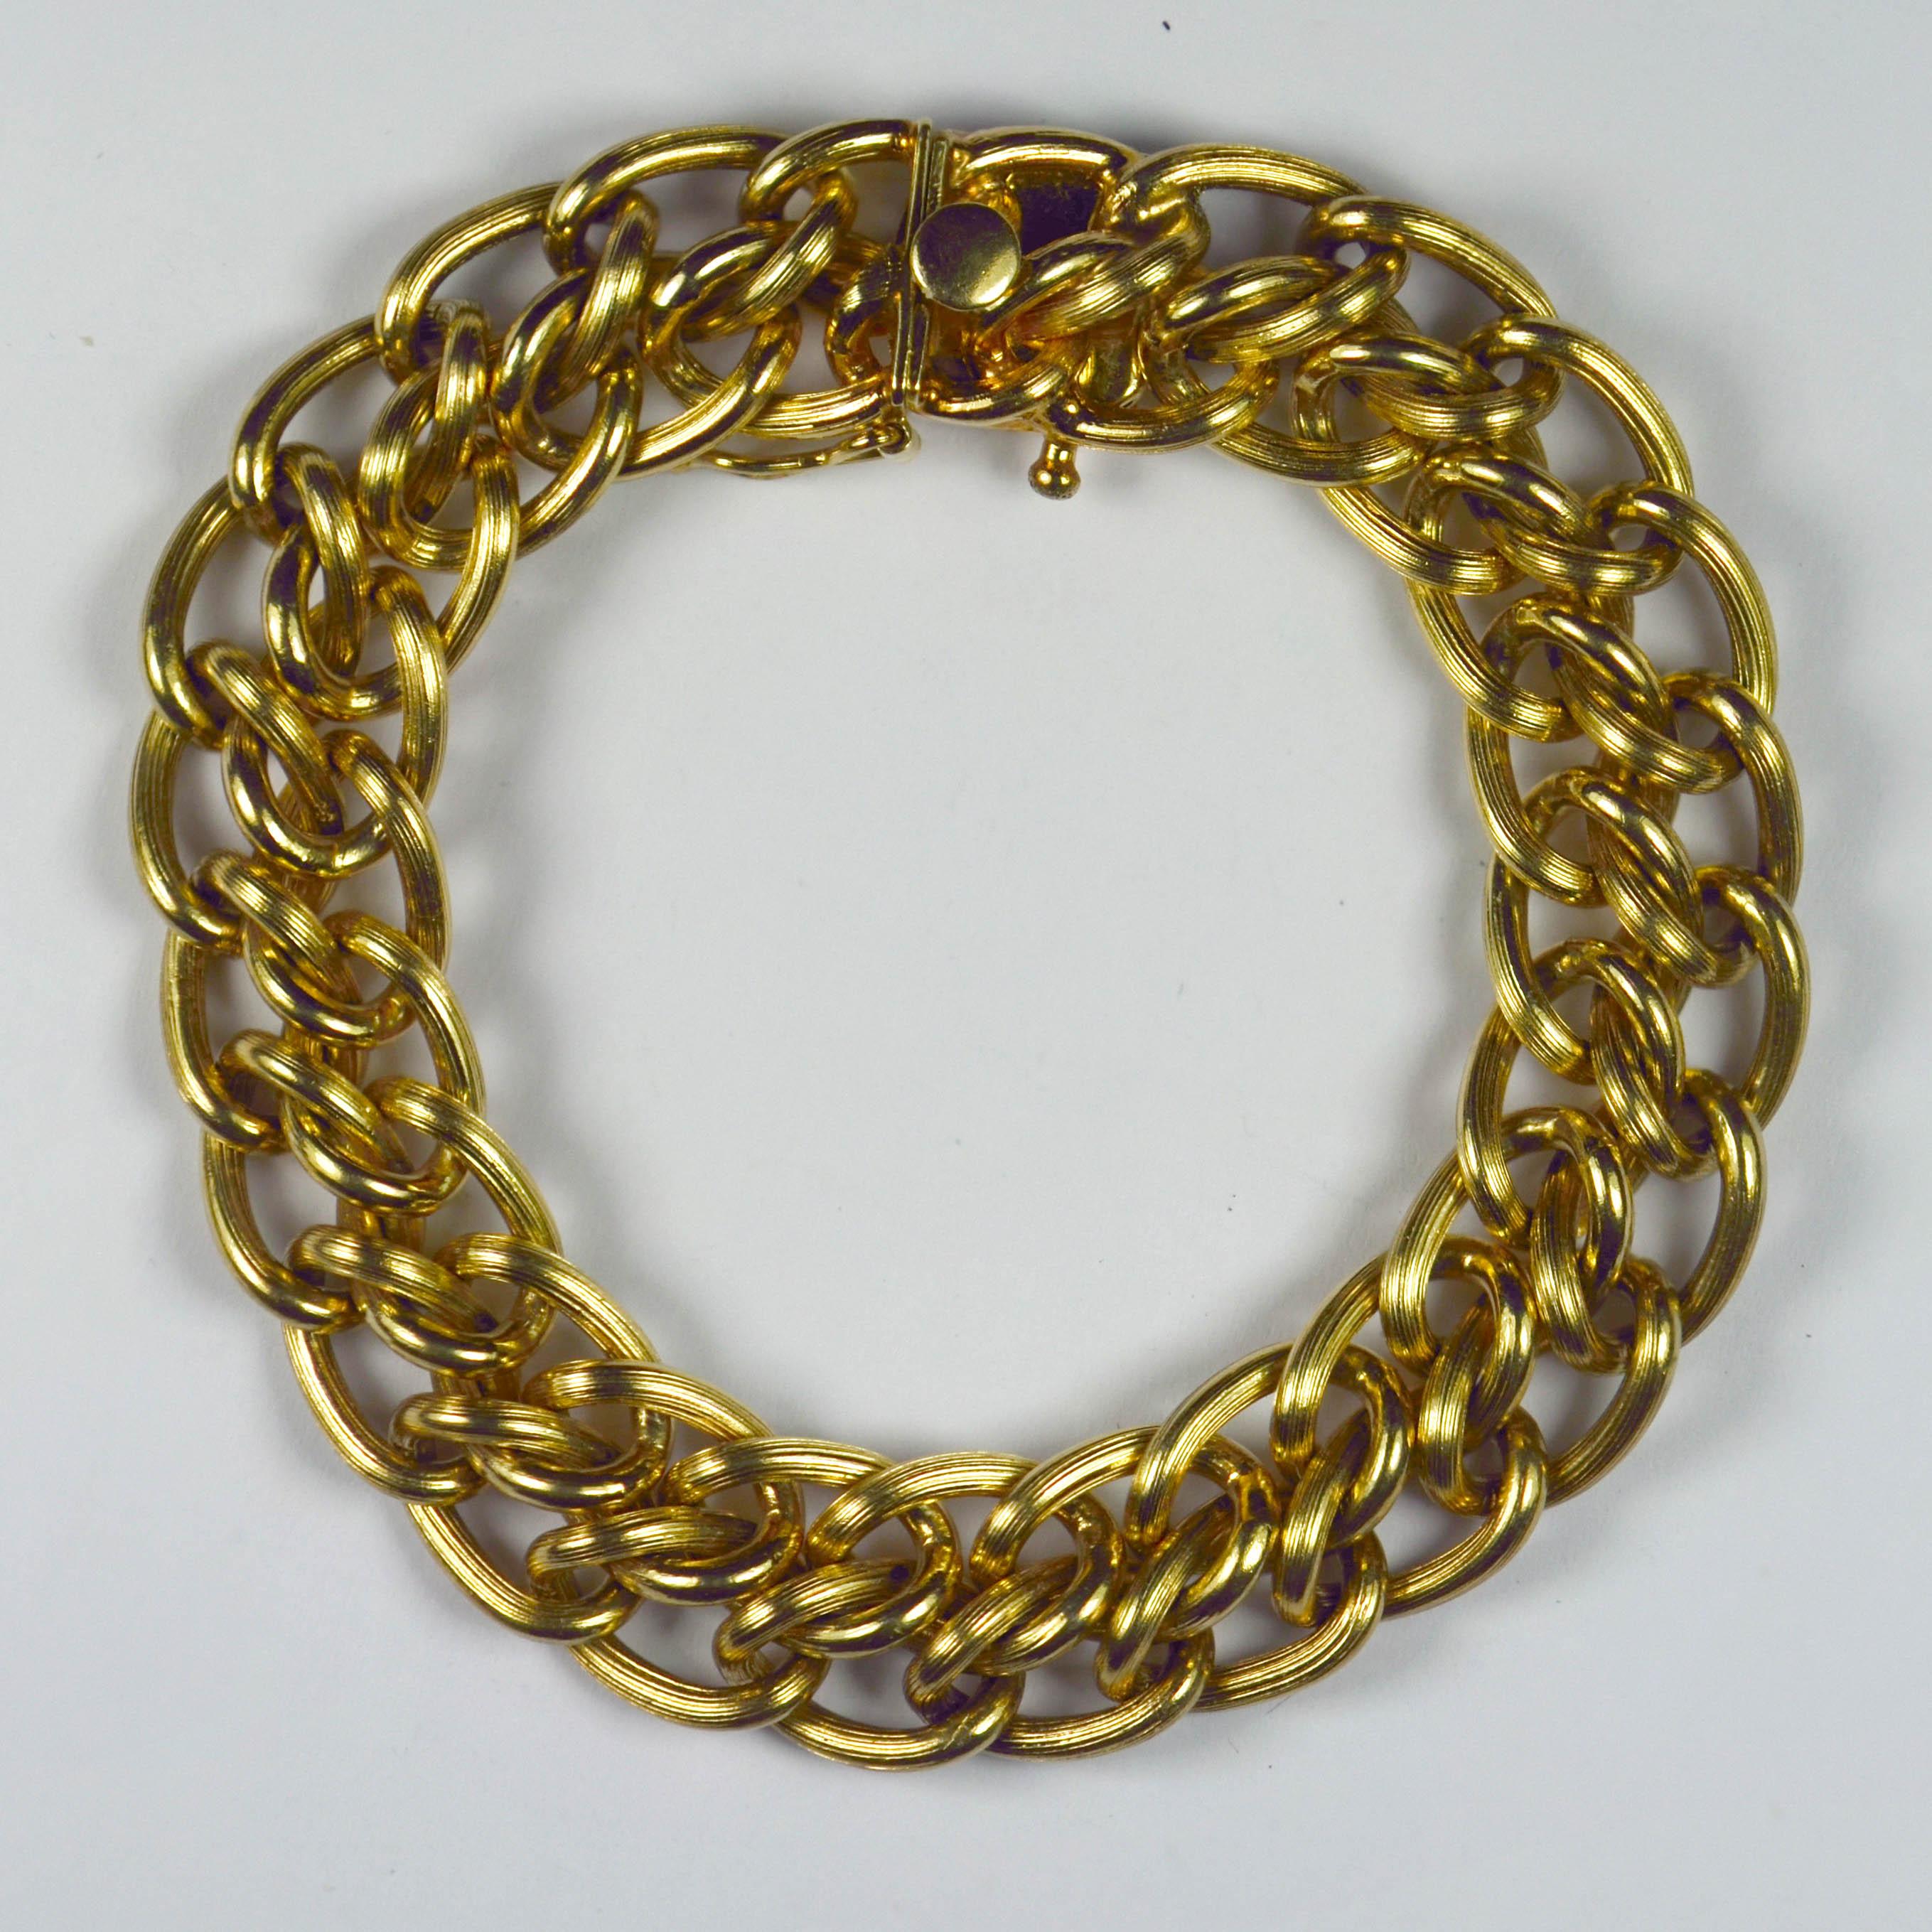 A 14 karat yellow gold double curb link bracelet with engraved lines to each link. Marked 14K to the box clasp for 14 karat gold, with safety catch for added security.

Dimensions: 7.5” (19cm) long, ½” (1.3cm) wide.
Weight: 54.72 grams
